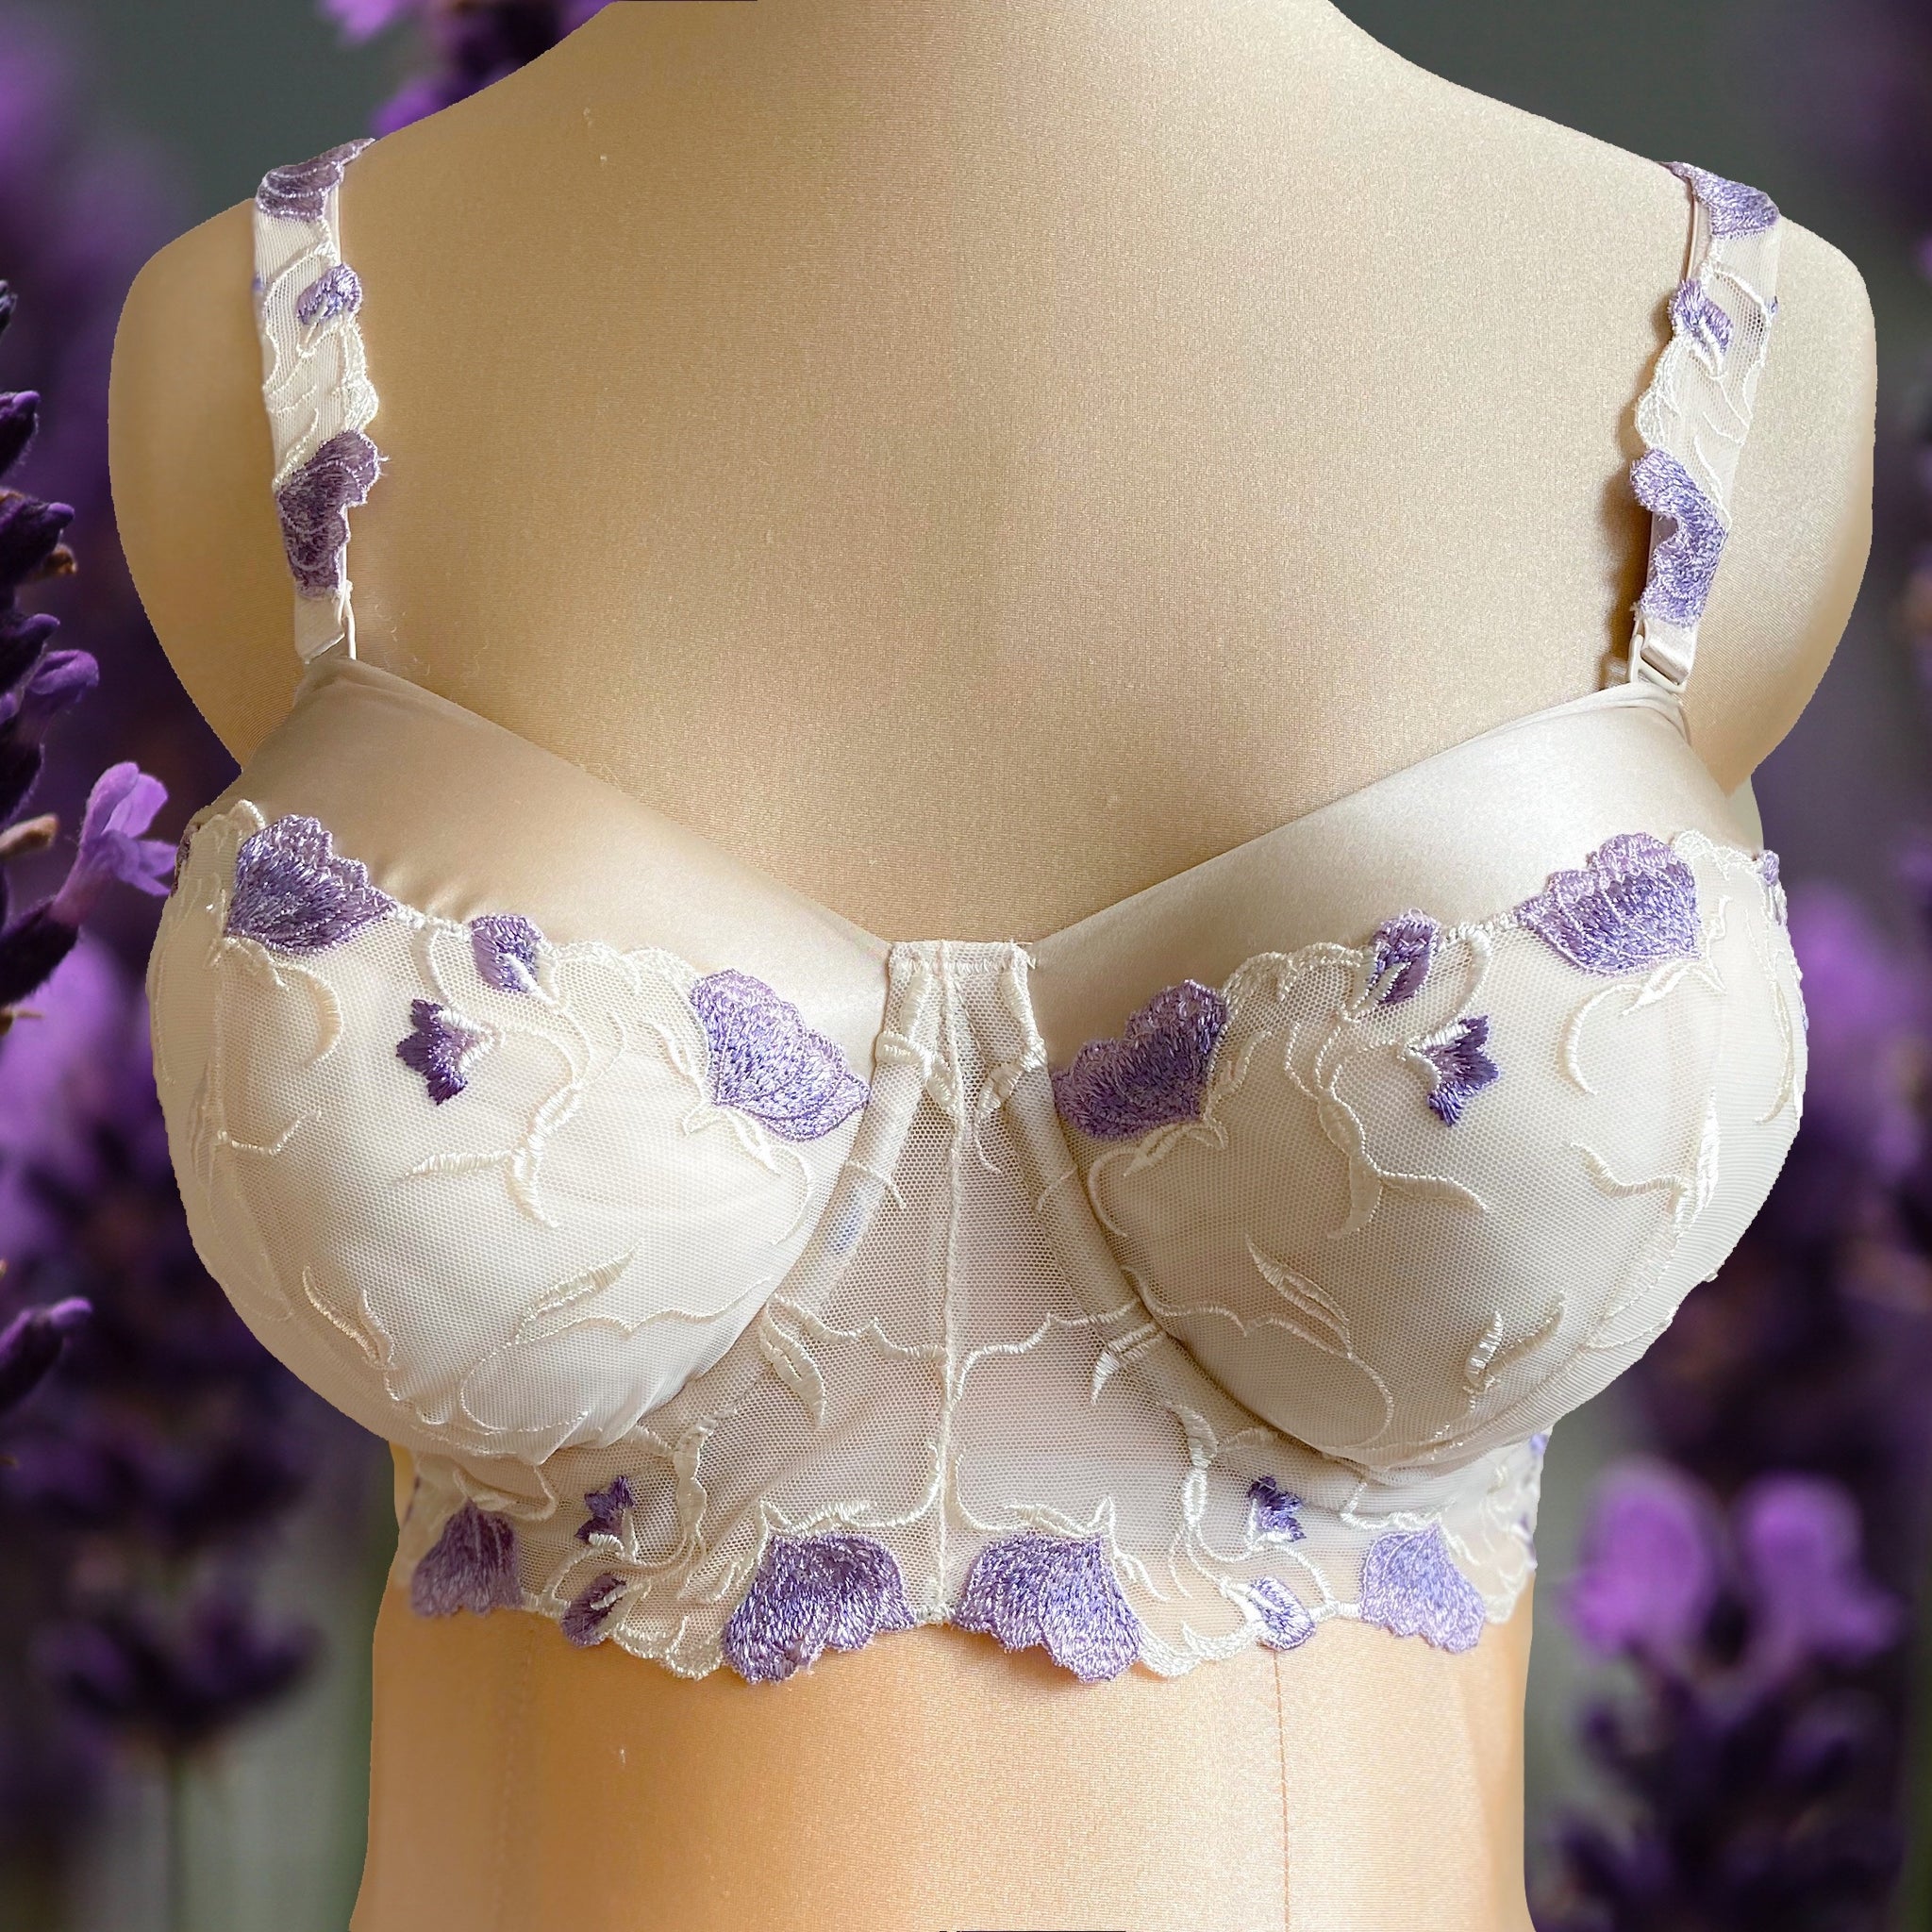 Underwired full-cup bra, good support, lace, floral embroidery, Lilac  pastel purple | ROMY | Empreinte Official Boutique